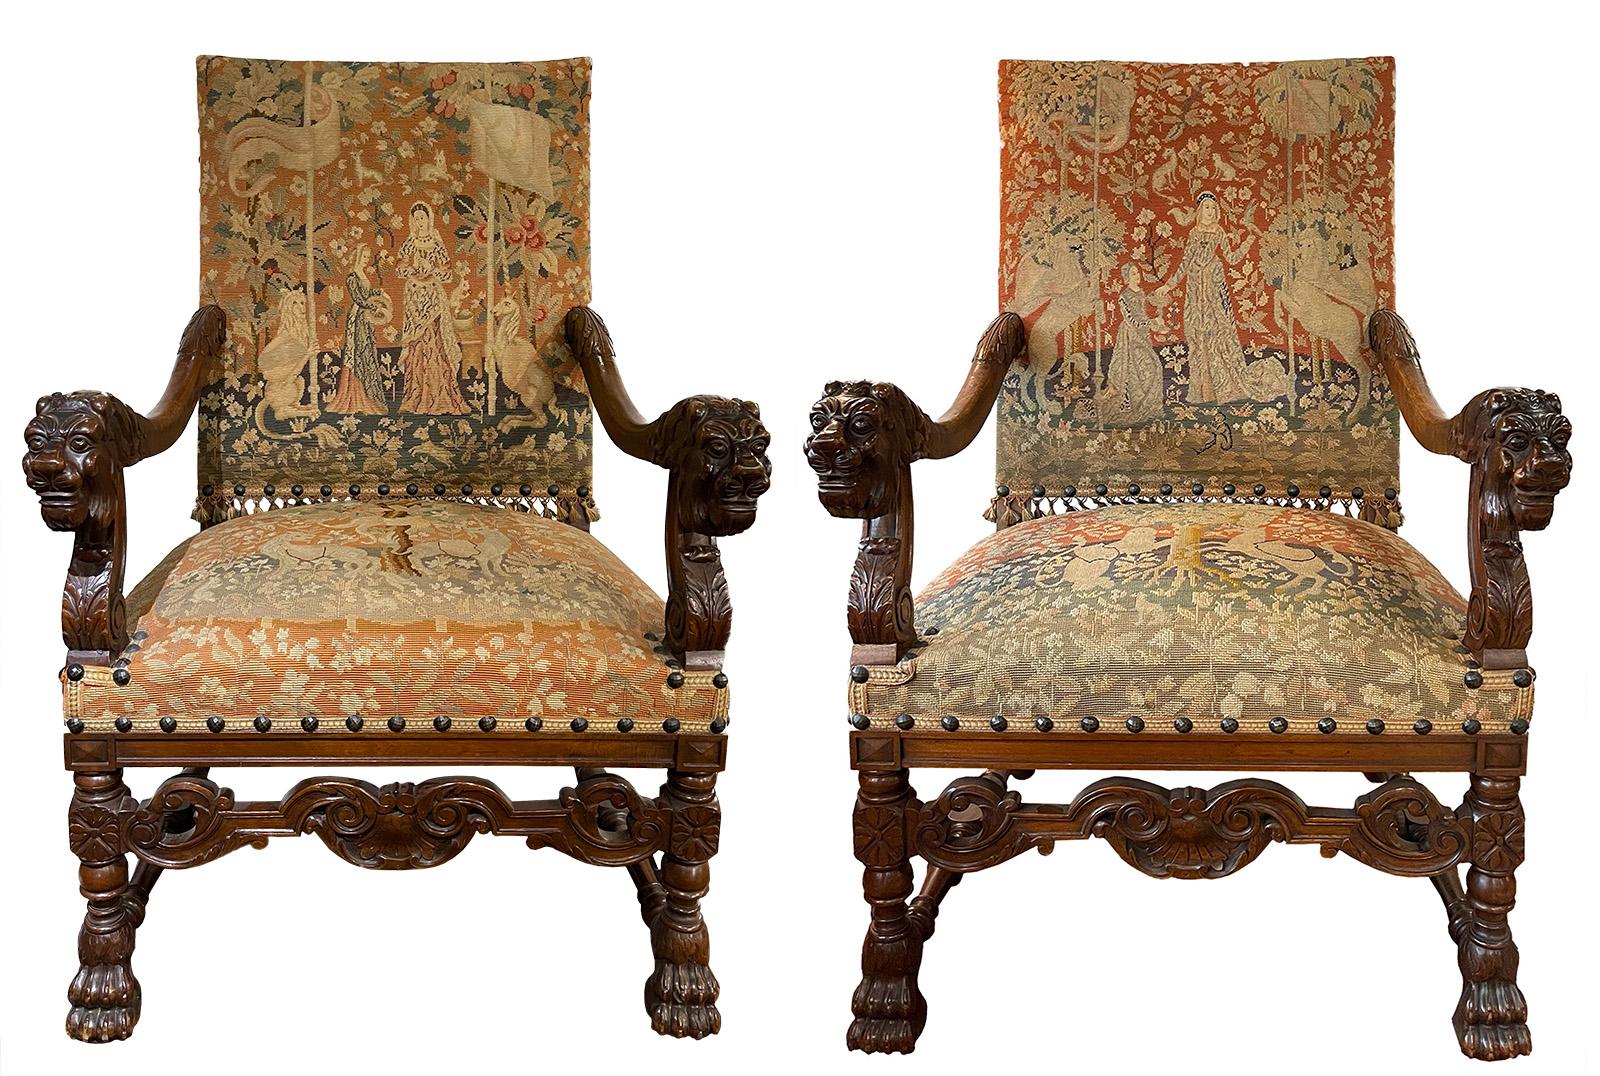 A pair of 19th century French armchairs inspired by 